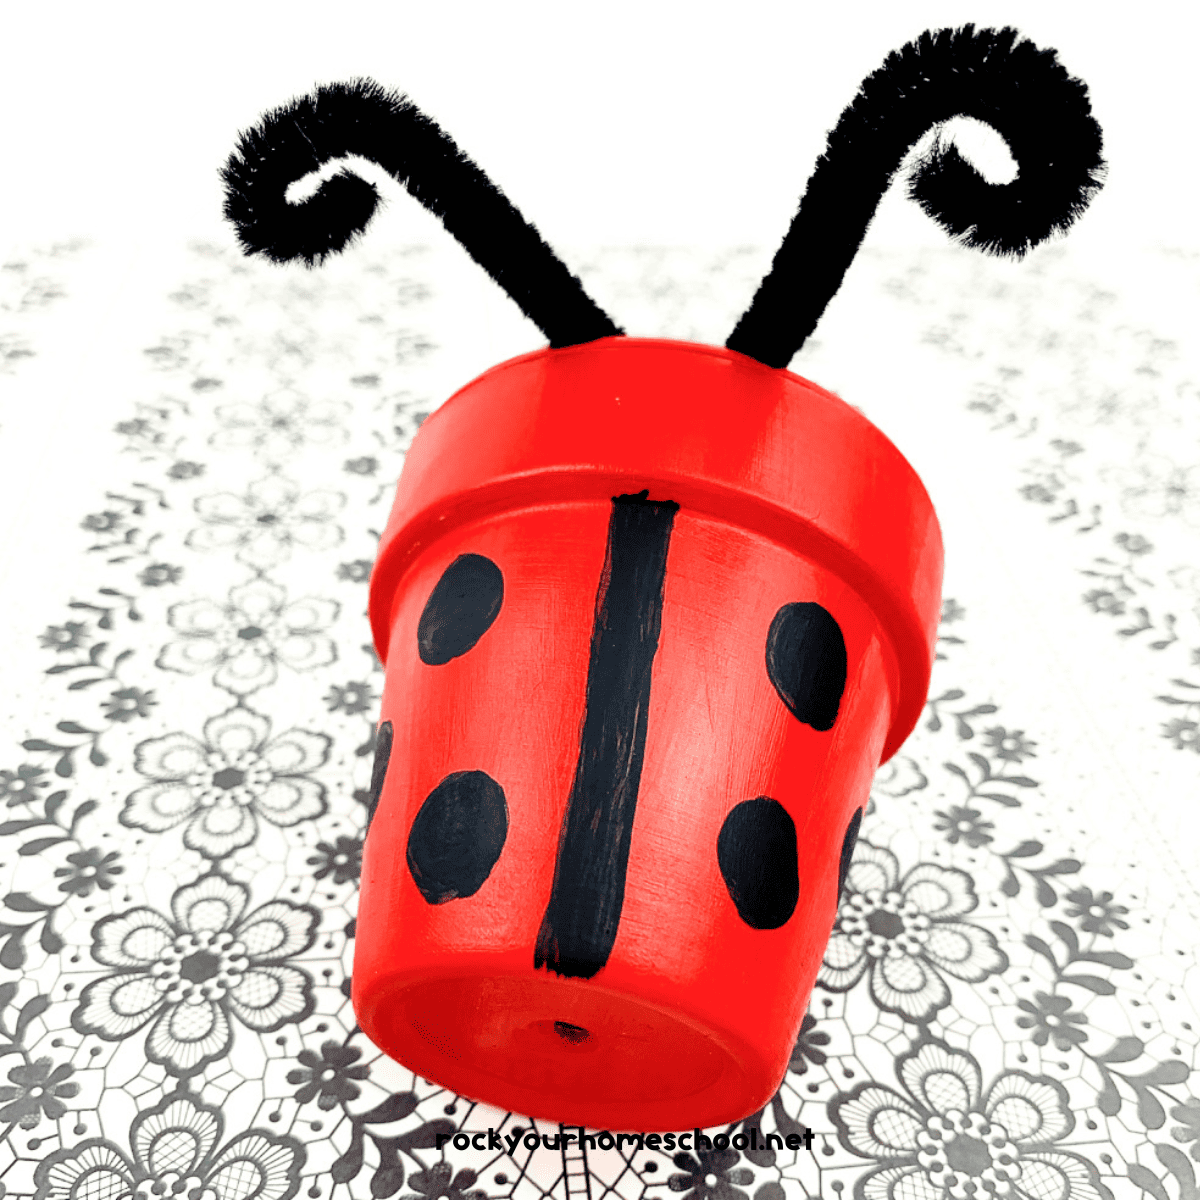 Ladybug Craft for Kids: How to Make with Clay Pot